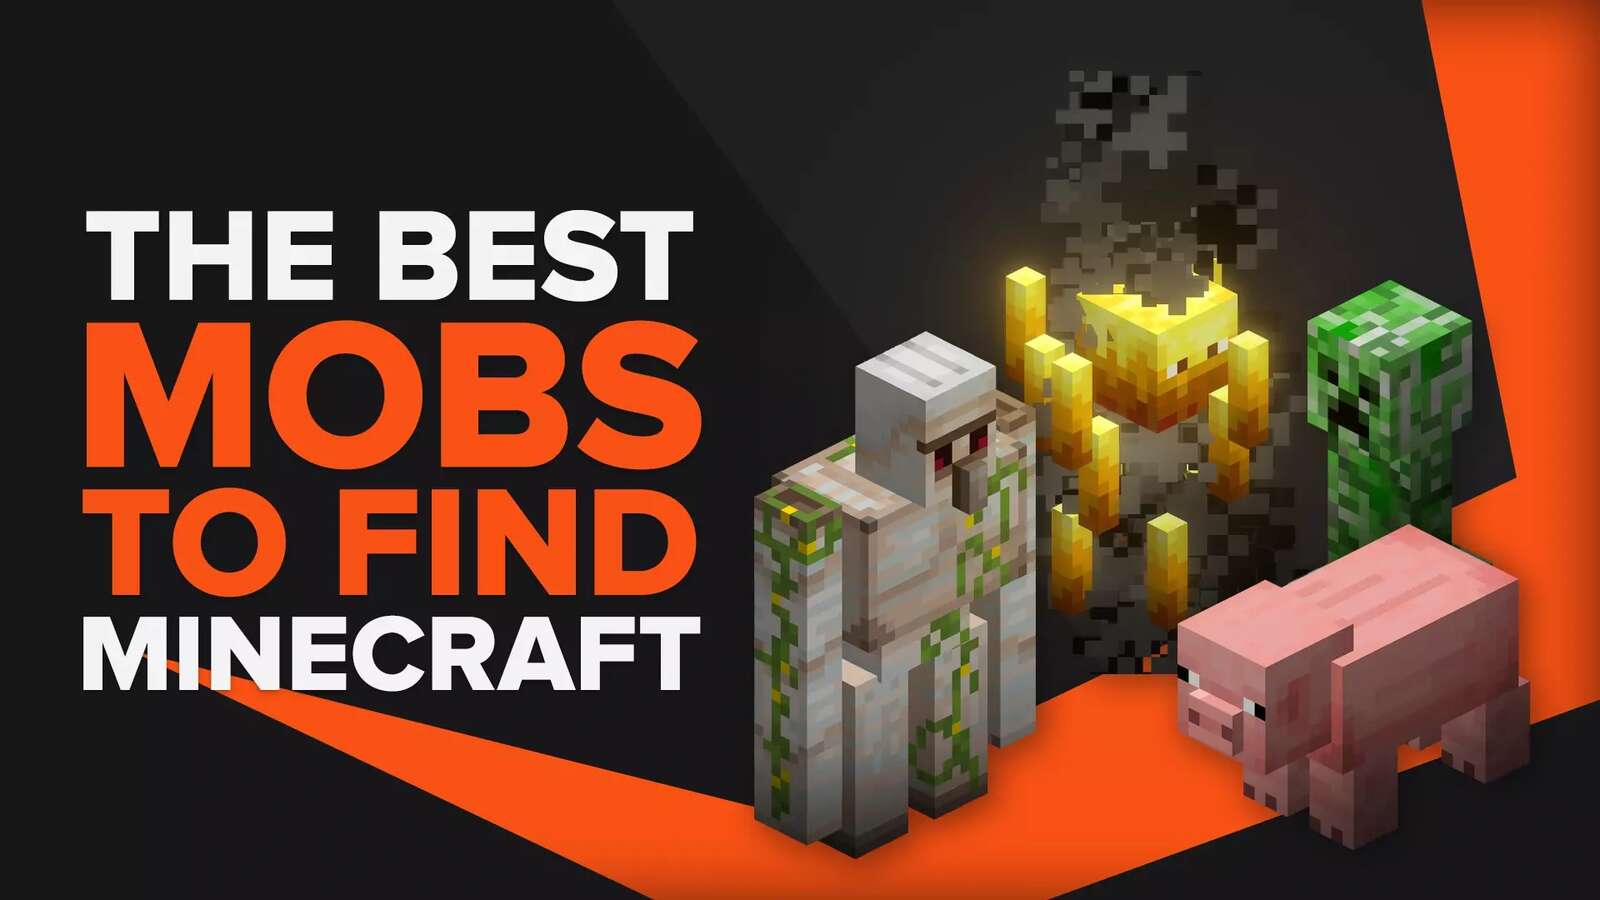 Top 10 Best Mobs You Should Find in Minecraft